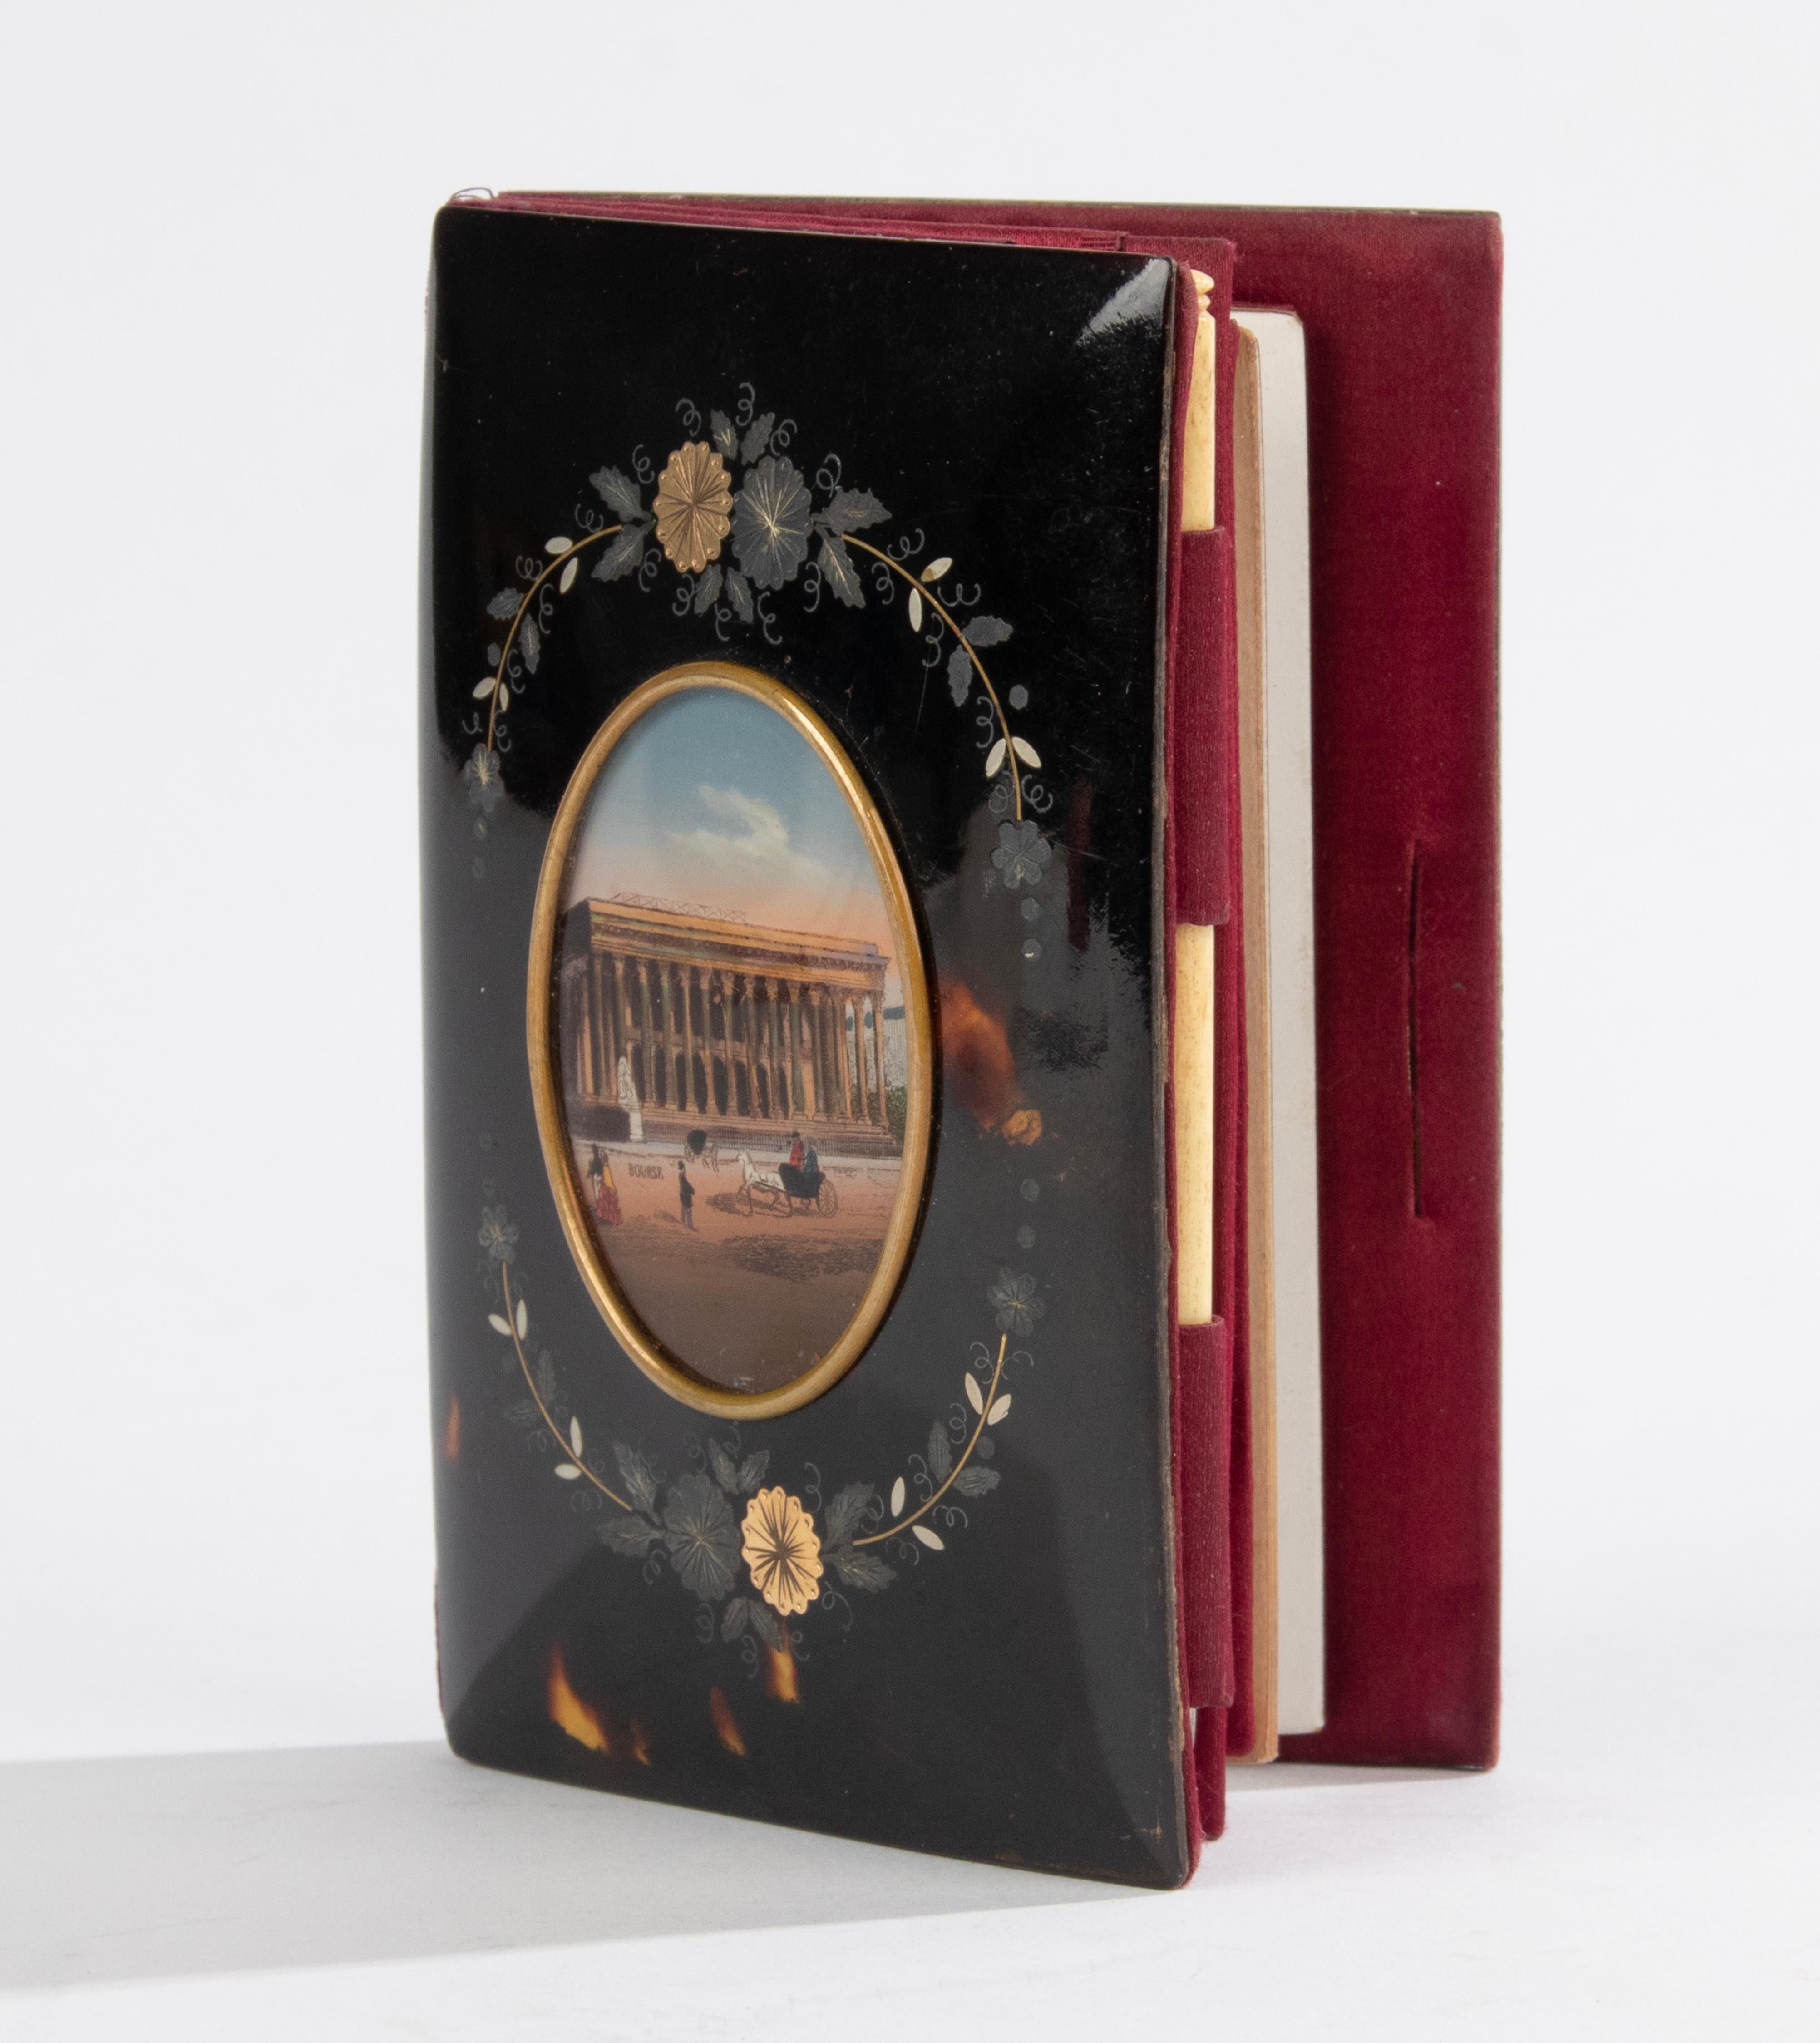 A small antique notebook. At the front cover is a hand painted medallion depicting the Palais Bourse building, the Paris stock exchange. Surrounded with foliage of tin and copper inlay. The cover is made of faux tortoise, a synthetic